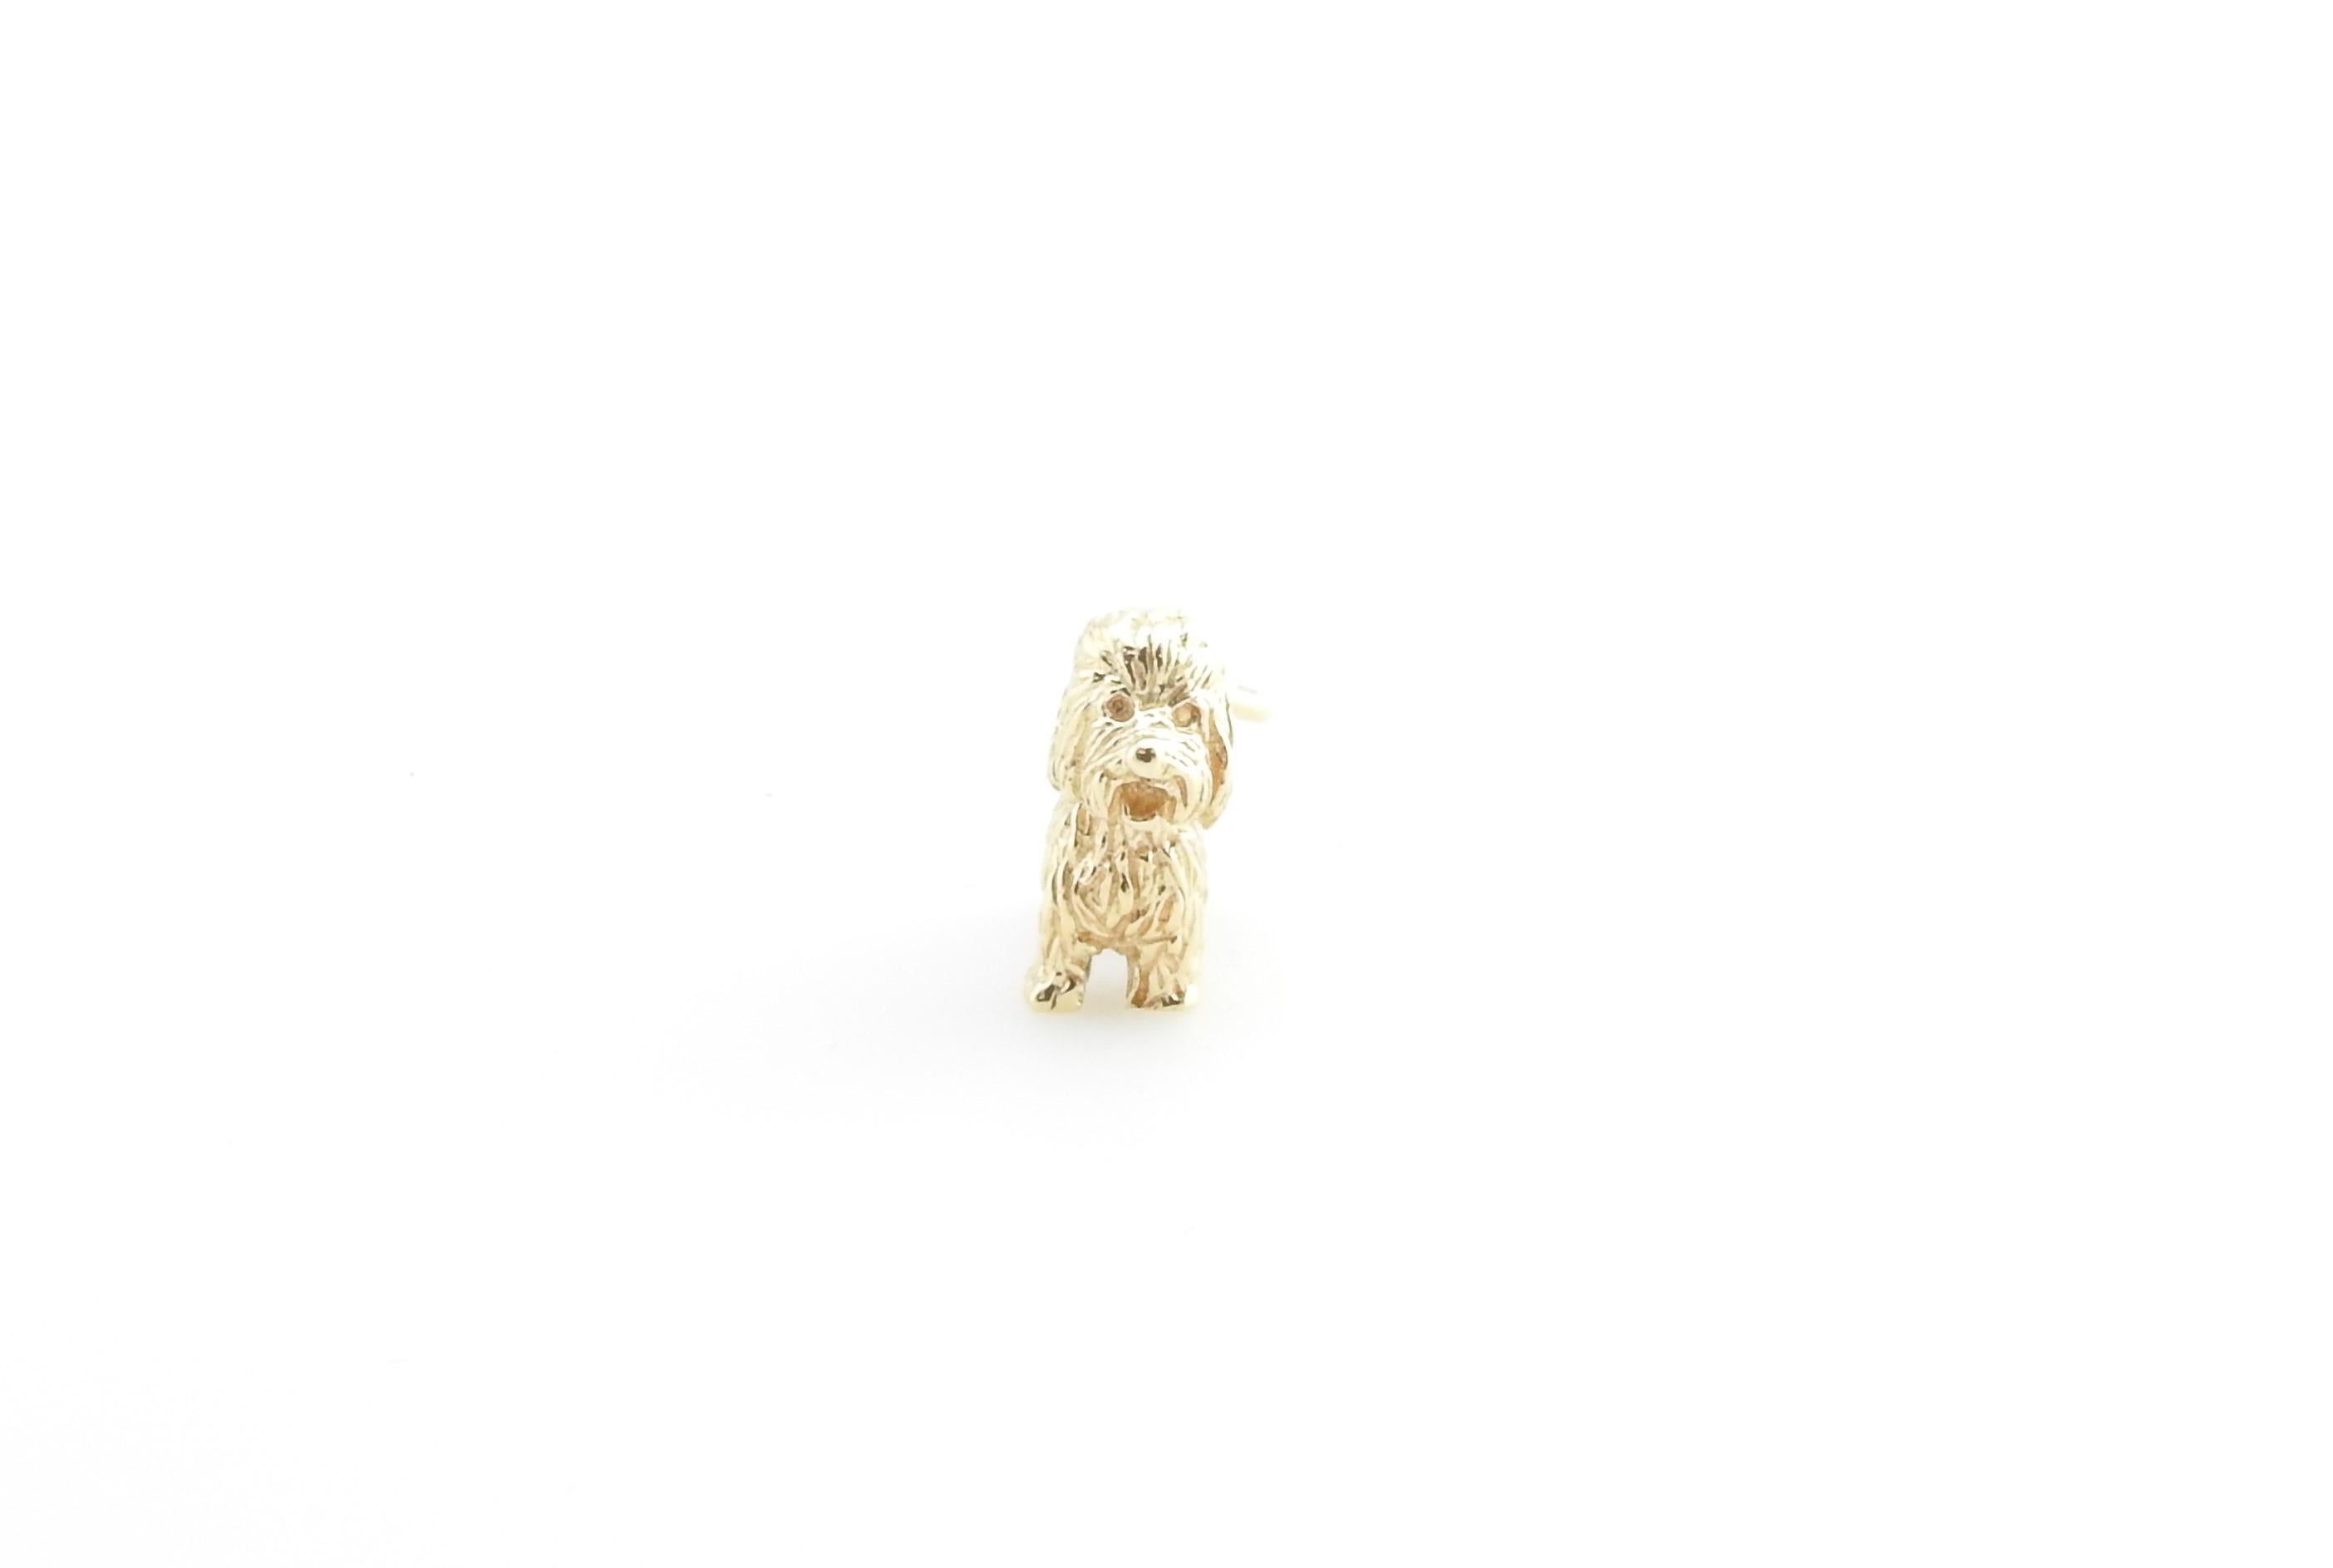 Vintage 14 Karat Yellow Gold Maltese Dog Charm

This lovely 3D charm features an adorable maltese meticulously detailed in 14K yellow gold.

Size: 12 mm x 15 mm actual charm

Weight: 2.3 dwt. / 3.6 gr.

Acid tested for 14K gold.

Very good